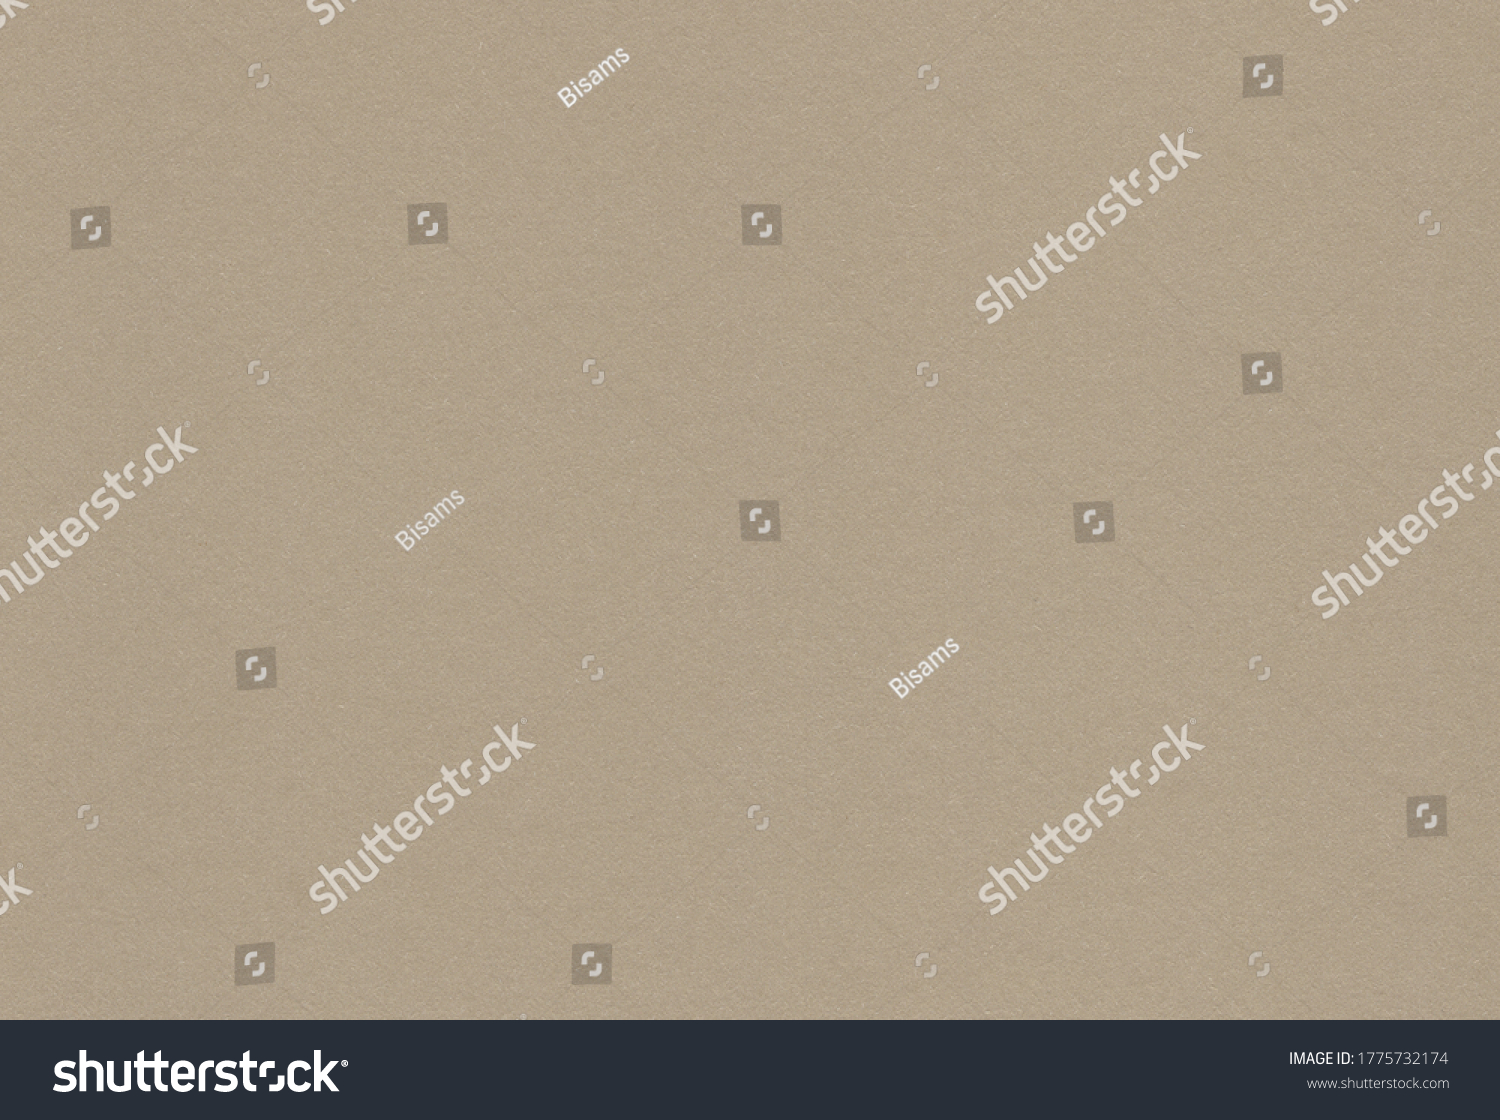 Textured brownish grey coloured carton paper background. Extra large highly detailed image. #1775732174